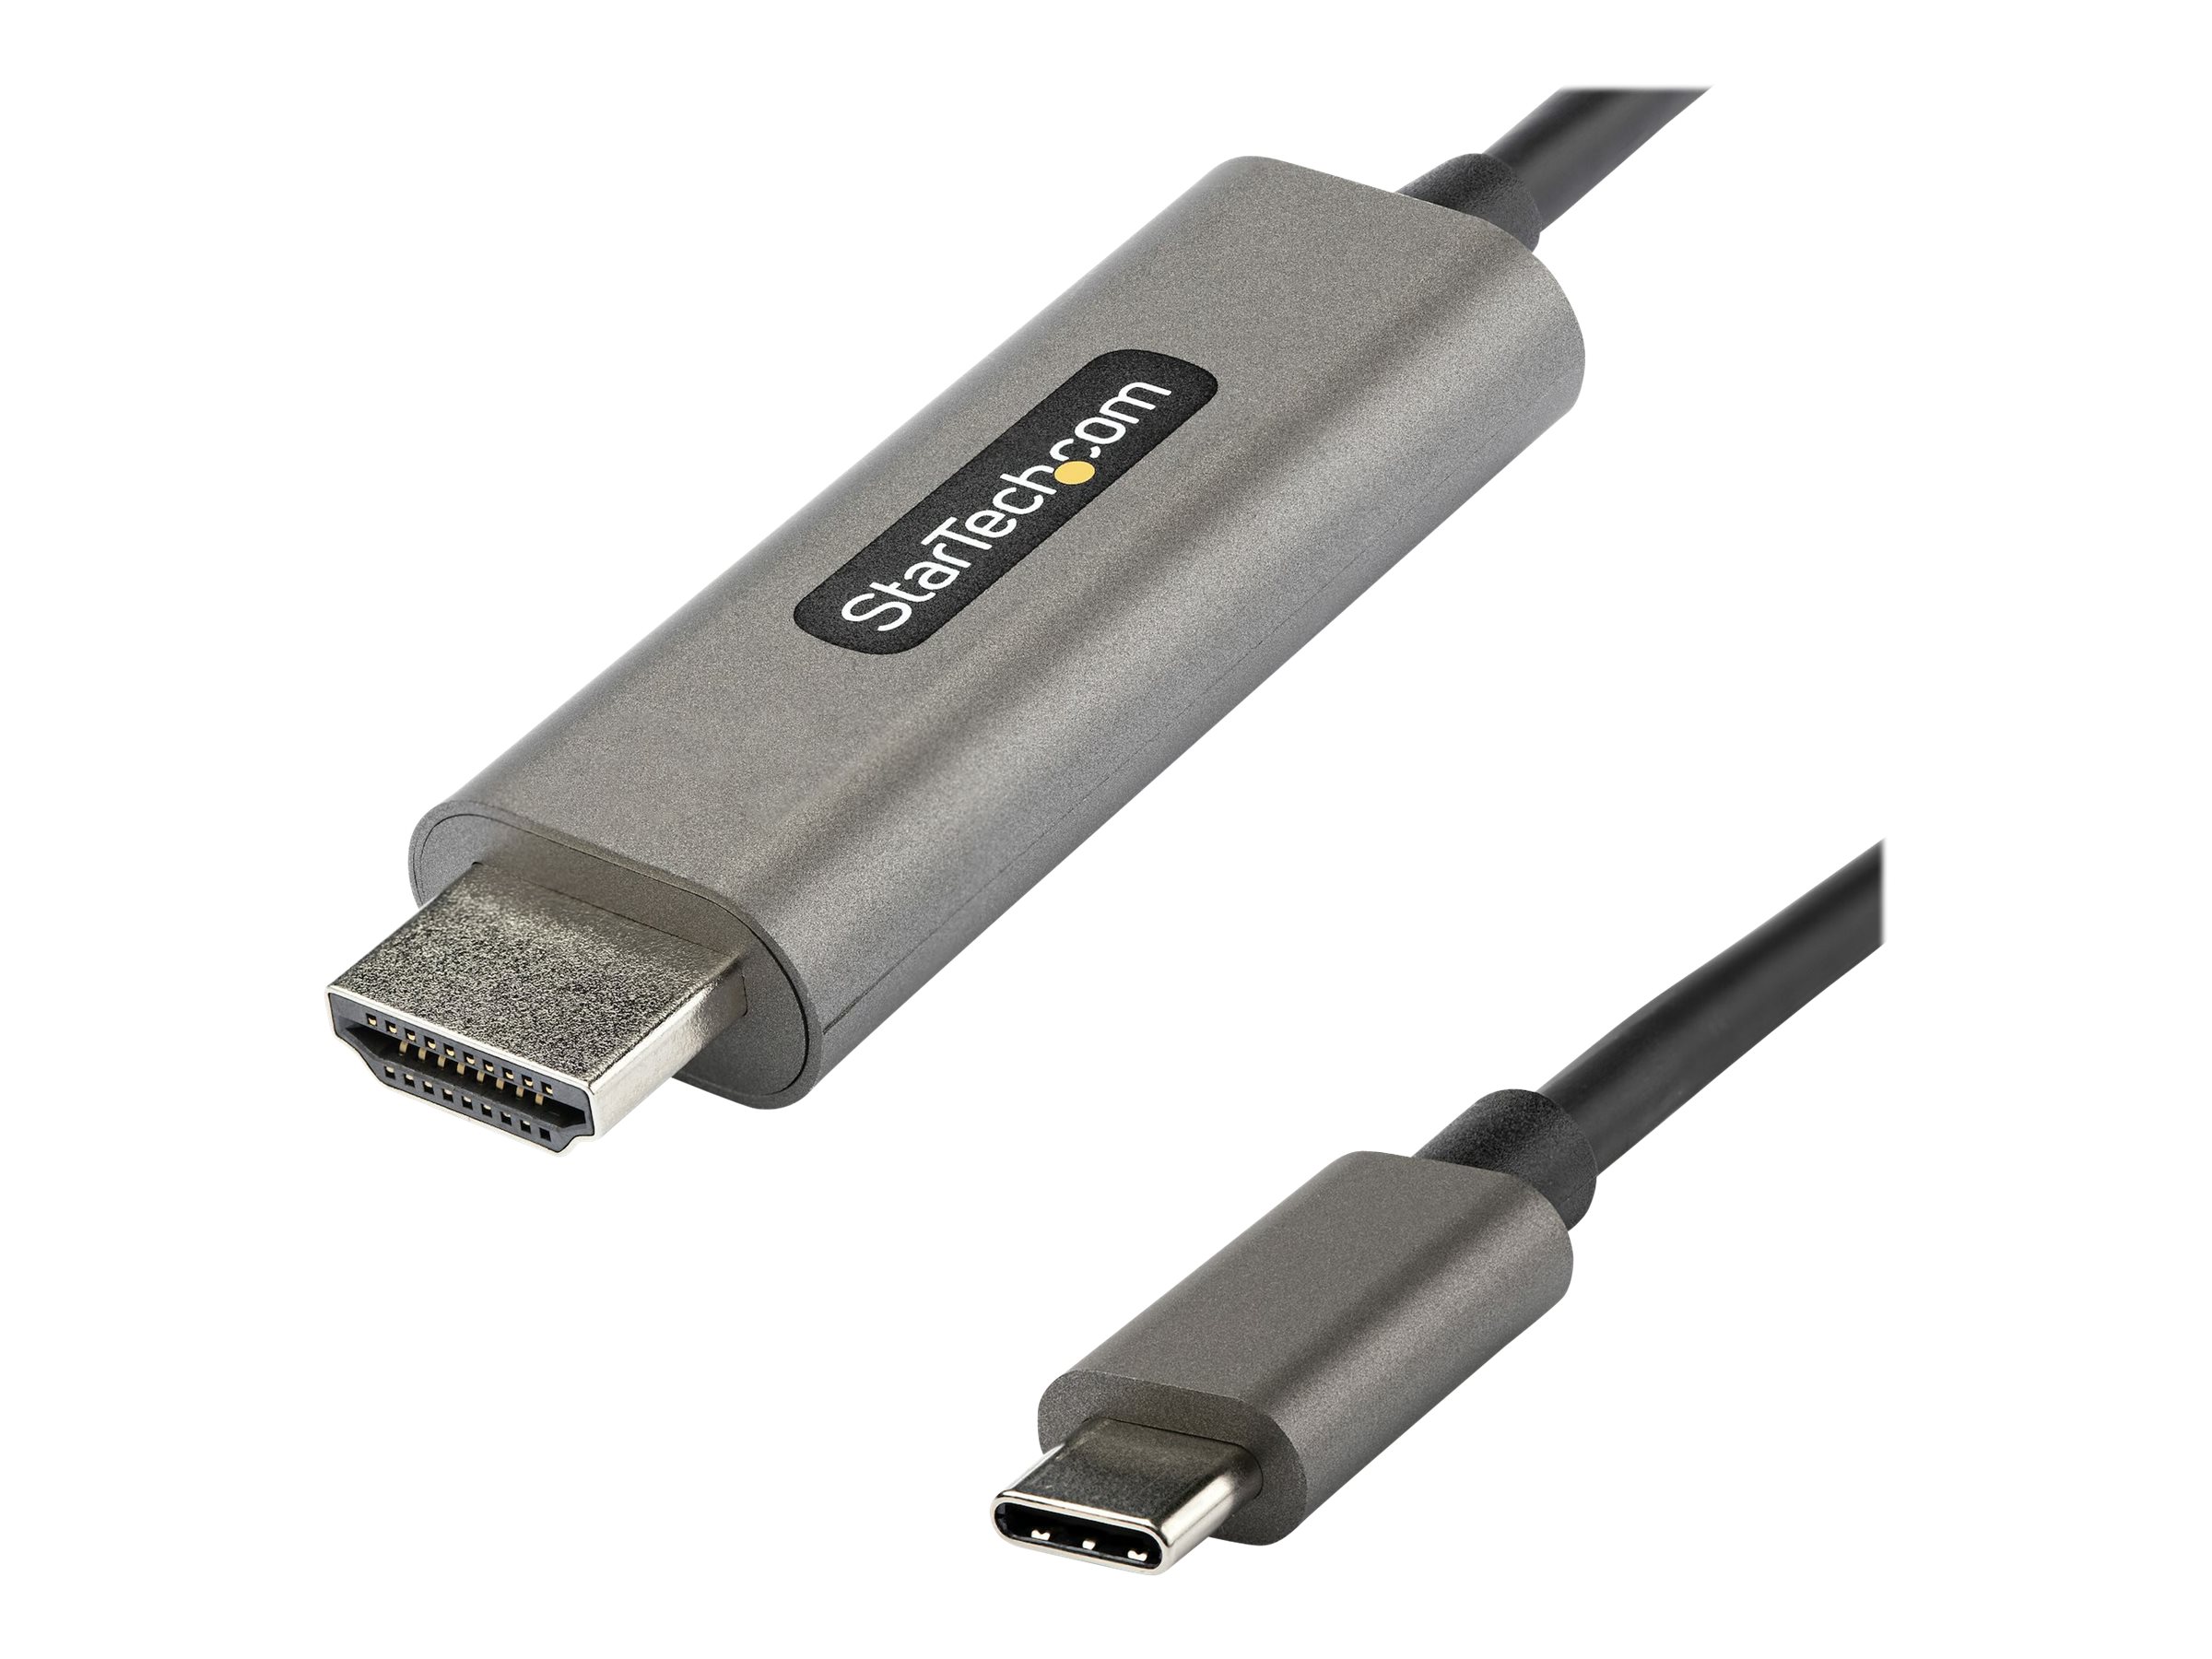 StarTech.com 6ft (2m) USB C to HDMI Cable 4K 60Hz with HDR10, Ultra HD USB Type-C to 4K HDMI 2.0b Video Adapter Cable, USB-C to HDMI HDR Monitor/Display Converter, DP 1.4 Alt Mode HBR3 - Thunderbolt 3 Compatible (CDP2HDMM2MH)